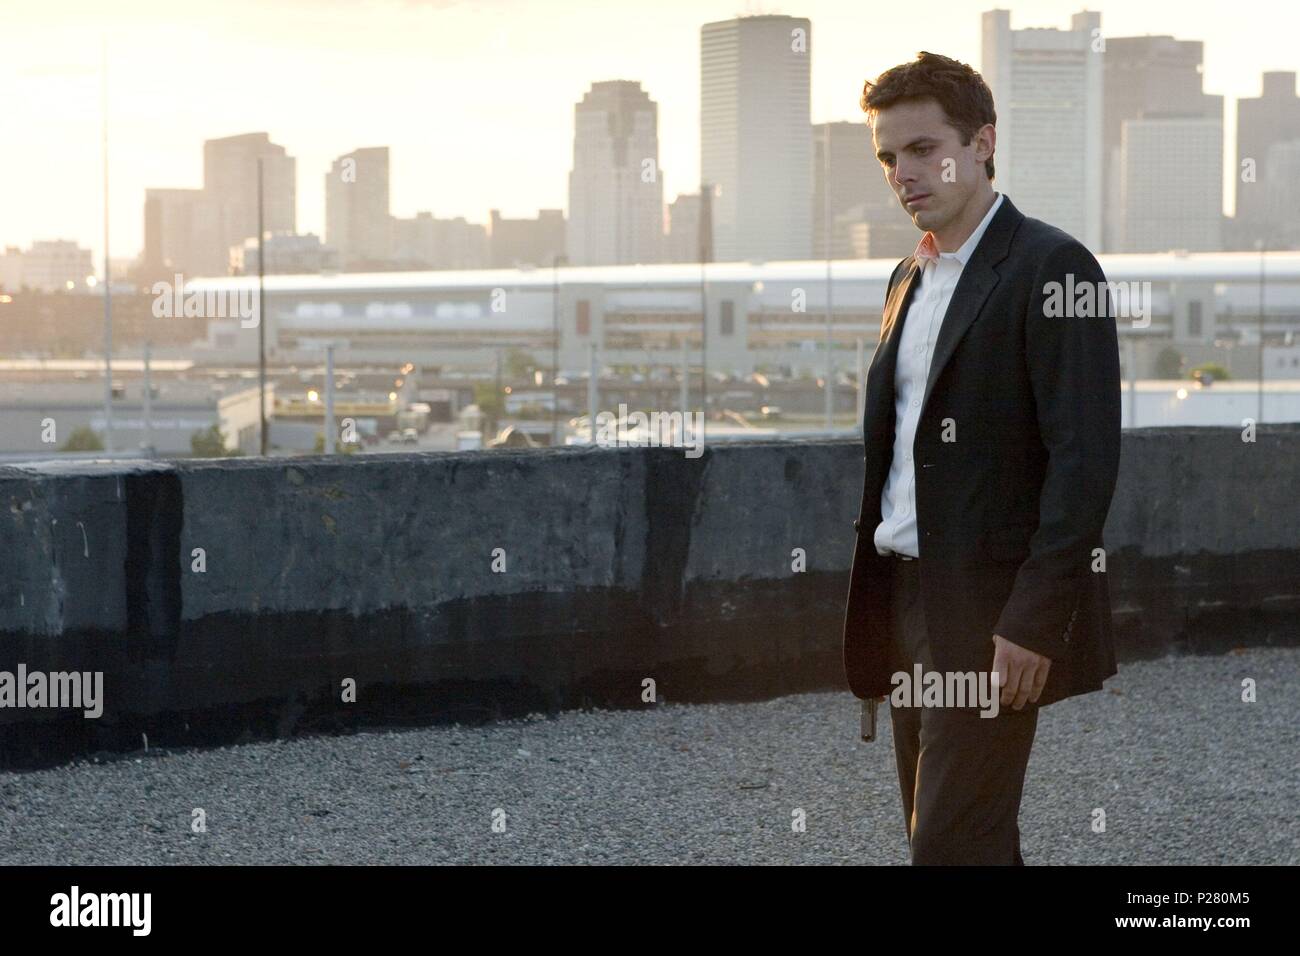 Original Film Title: GONE BABY GONE.  English Title: GONE BABY GONE.  Film Director: BEN AFFLECK.  Year: 2007.  Stars: CASEY AFFLECK. Copyright: Editorial inside use only. This is a publicly distributed handout. Access rights only, no license of copyright provided. Mandatory authorization to Visual Icon (www.visual-icon.com) is required for the reproduction of this image. Credit: MIRAMAX FILMS / Album Stock Photo